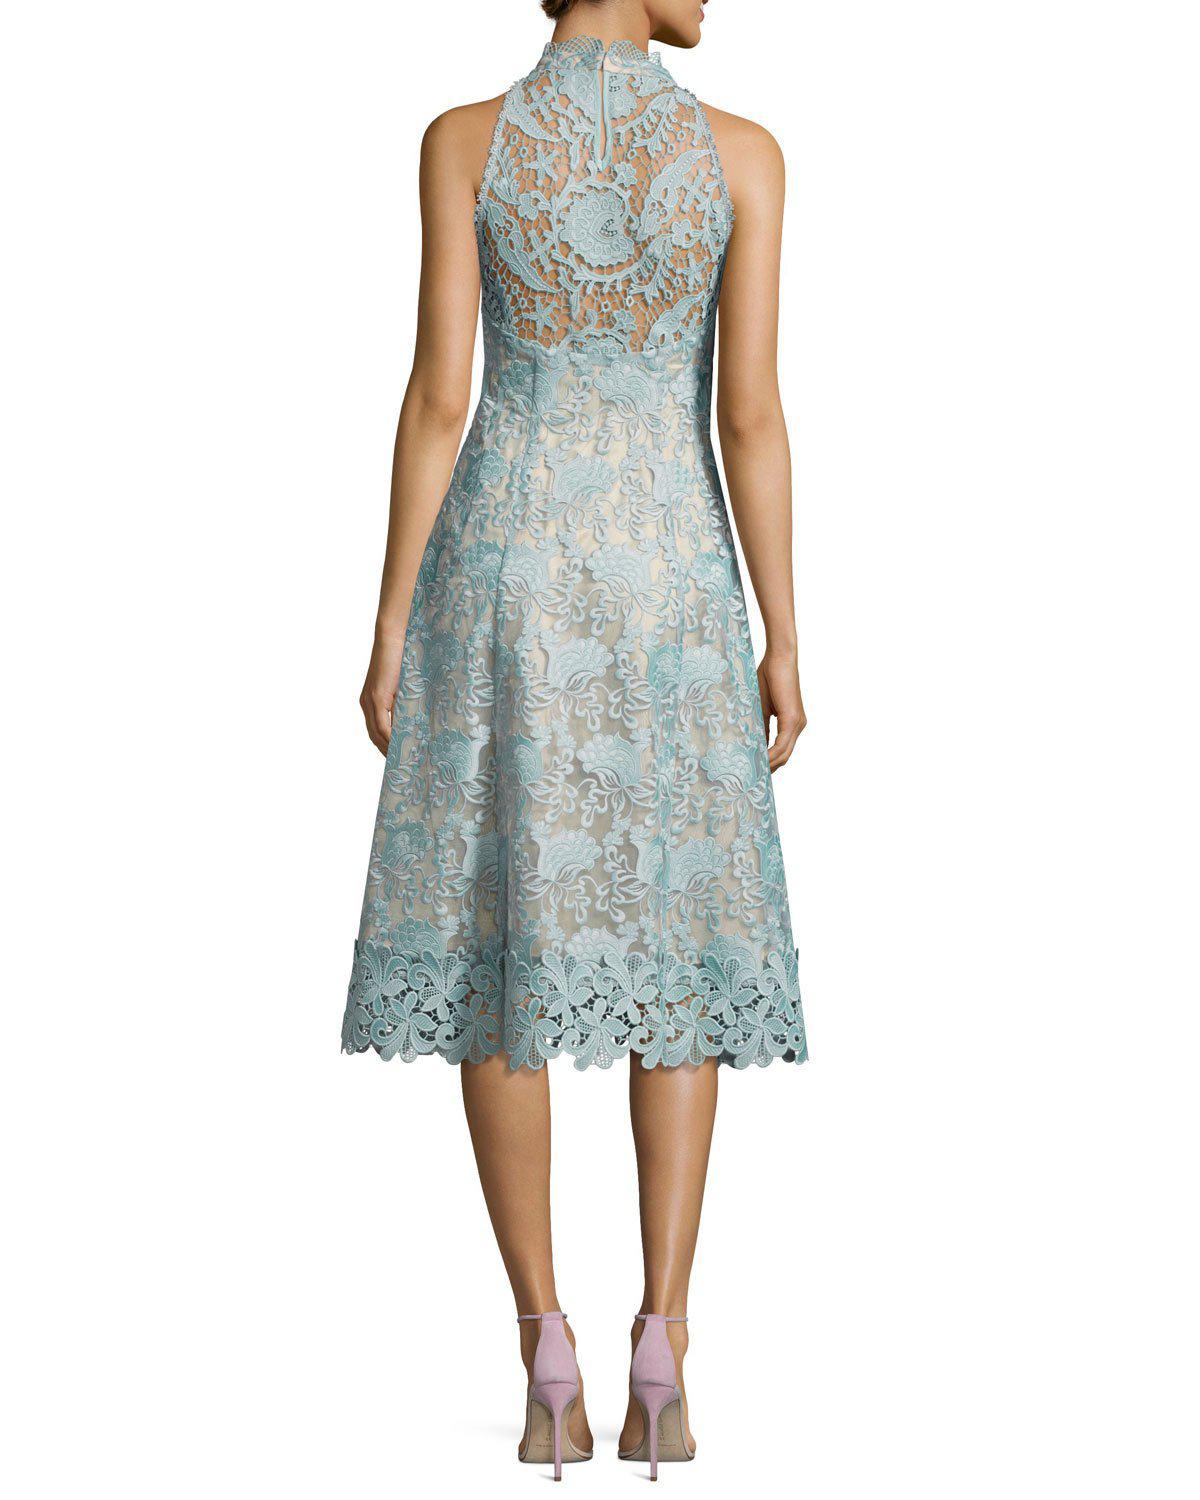 Nanette Lepore Sleeveless Floral Lace Cocktail Dress in Green - Lyst